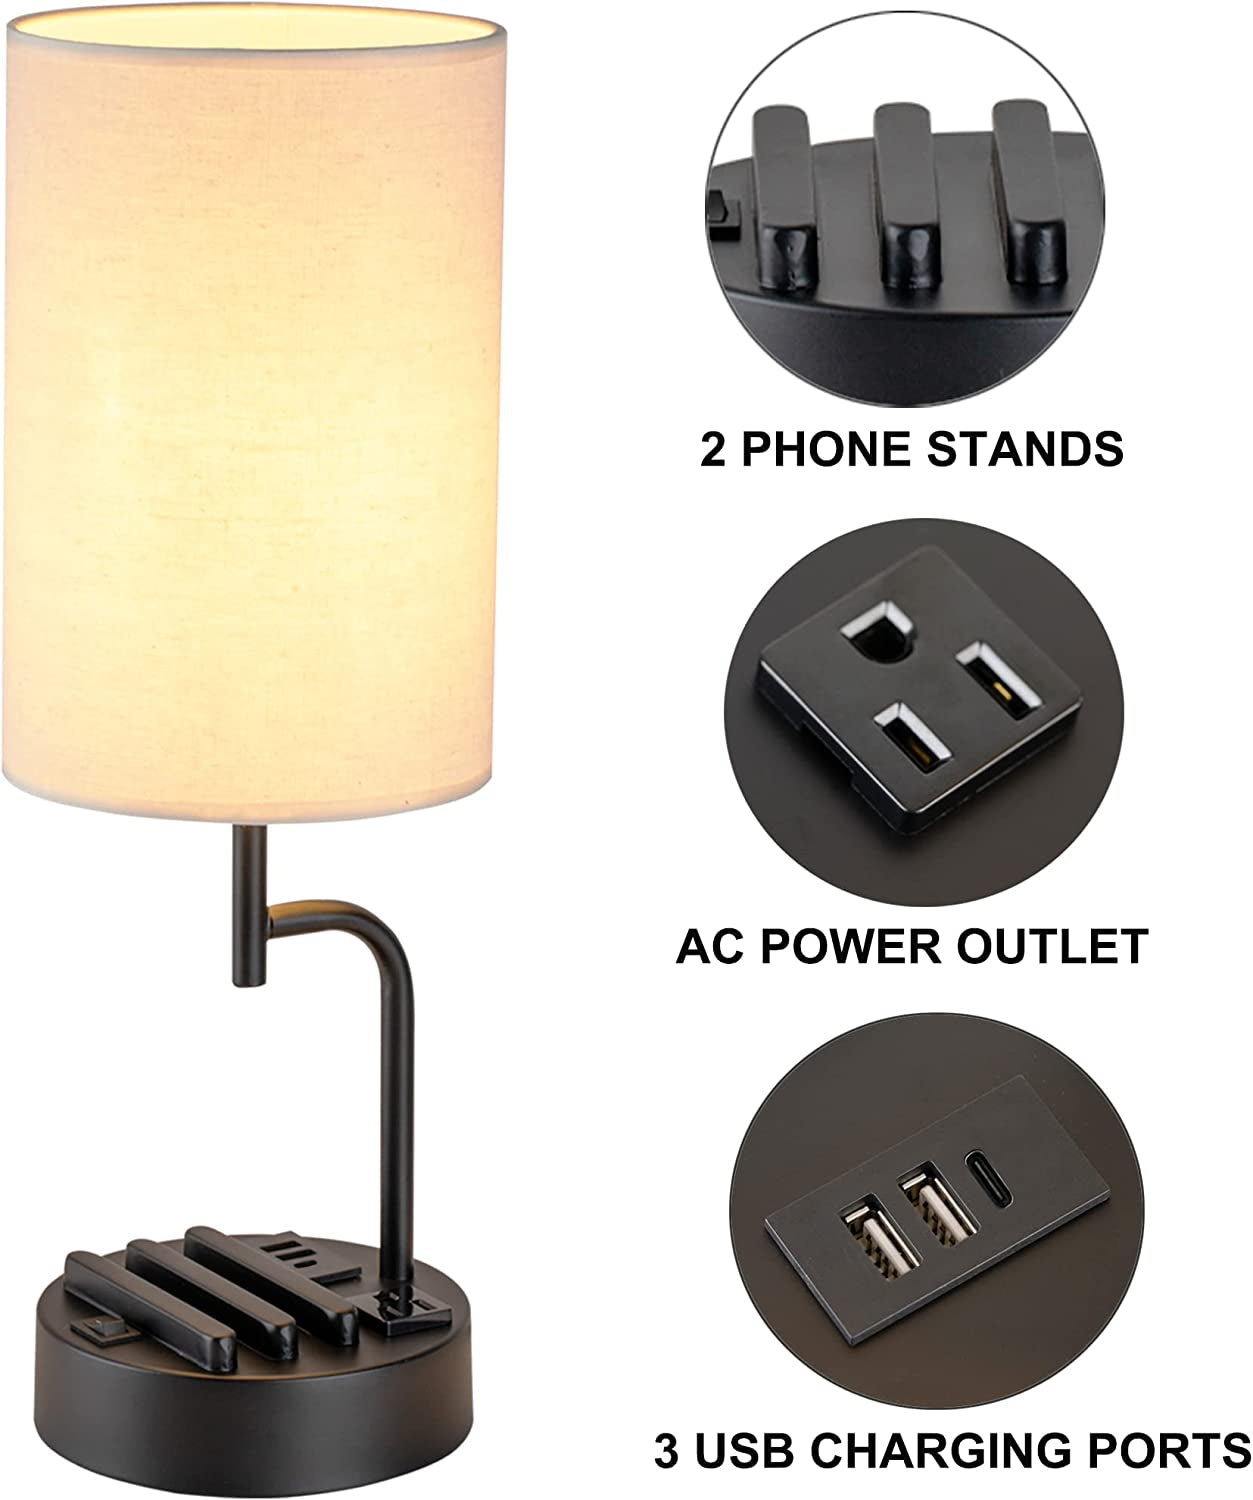 Table Lamp with 3 USB Charging Ports, Modern with AC Outlet and Phone Stands, Cream